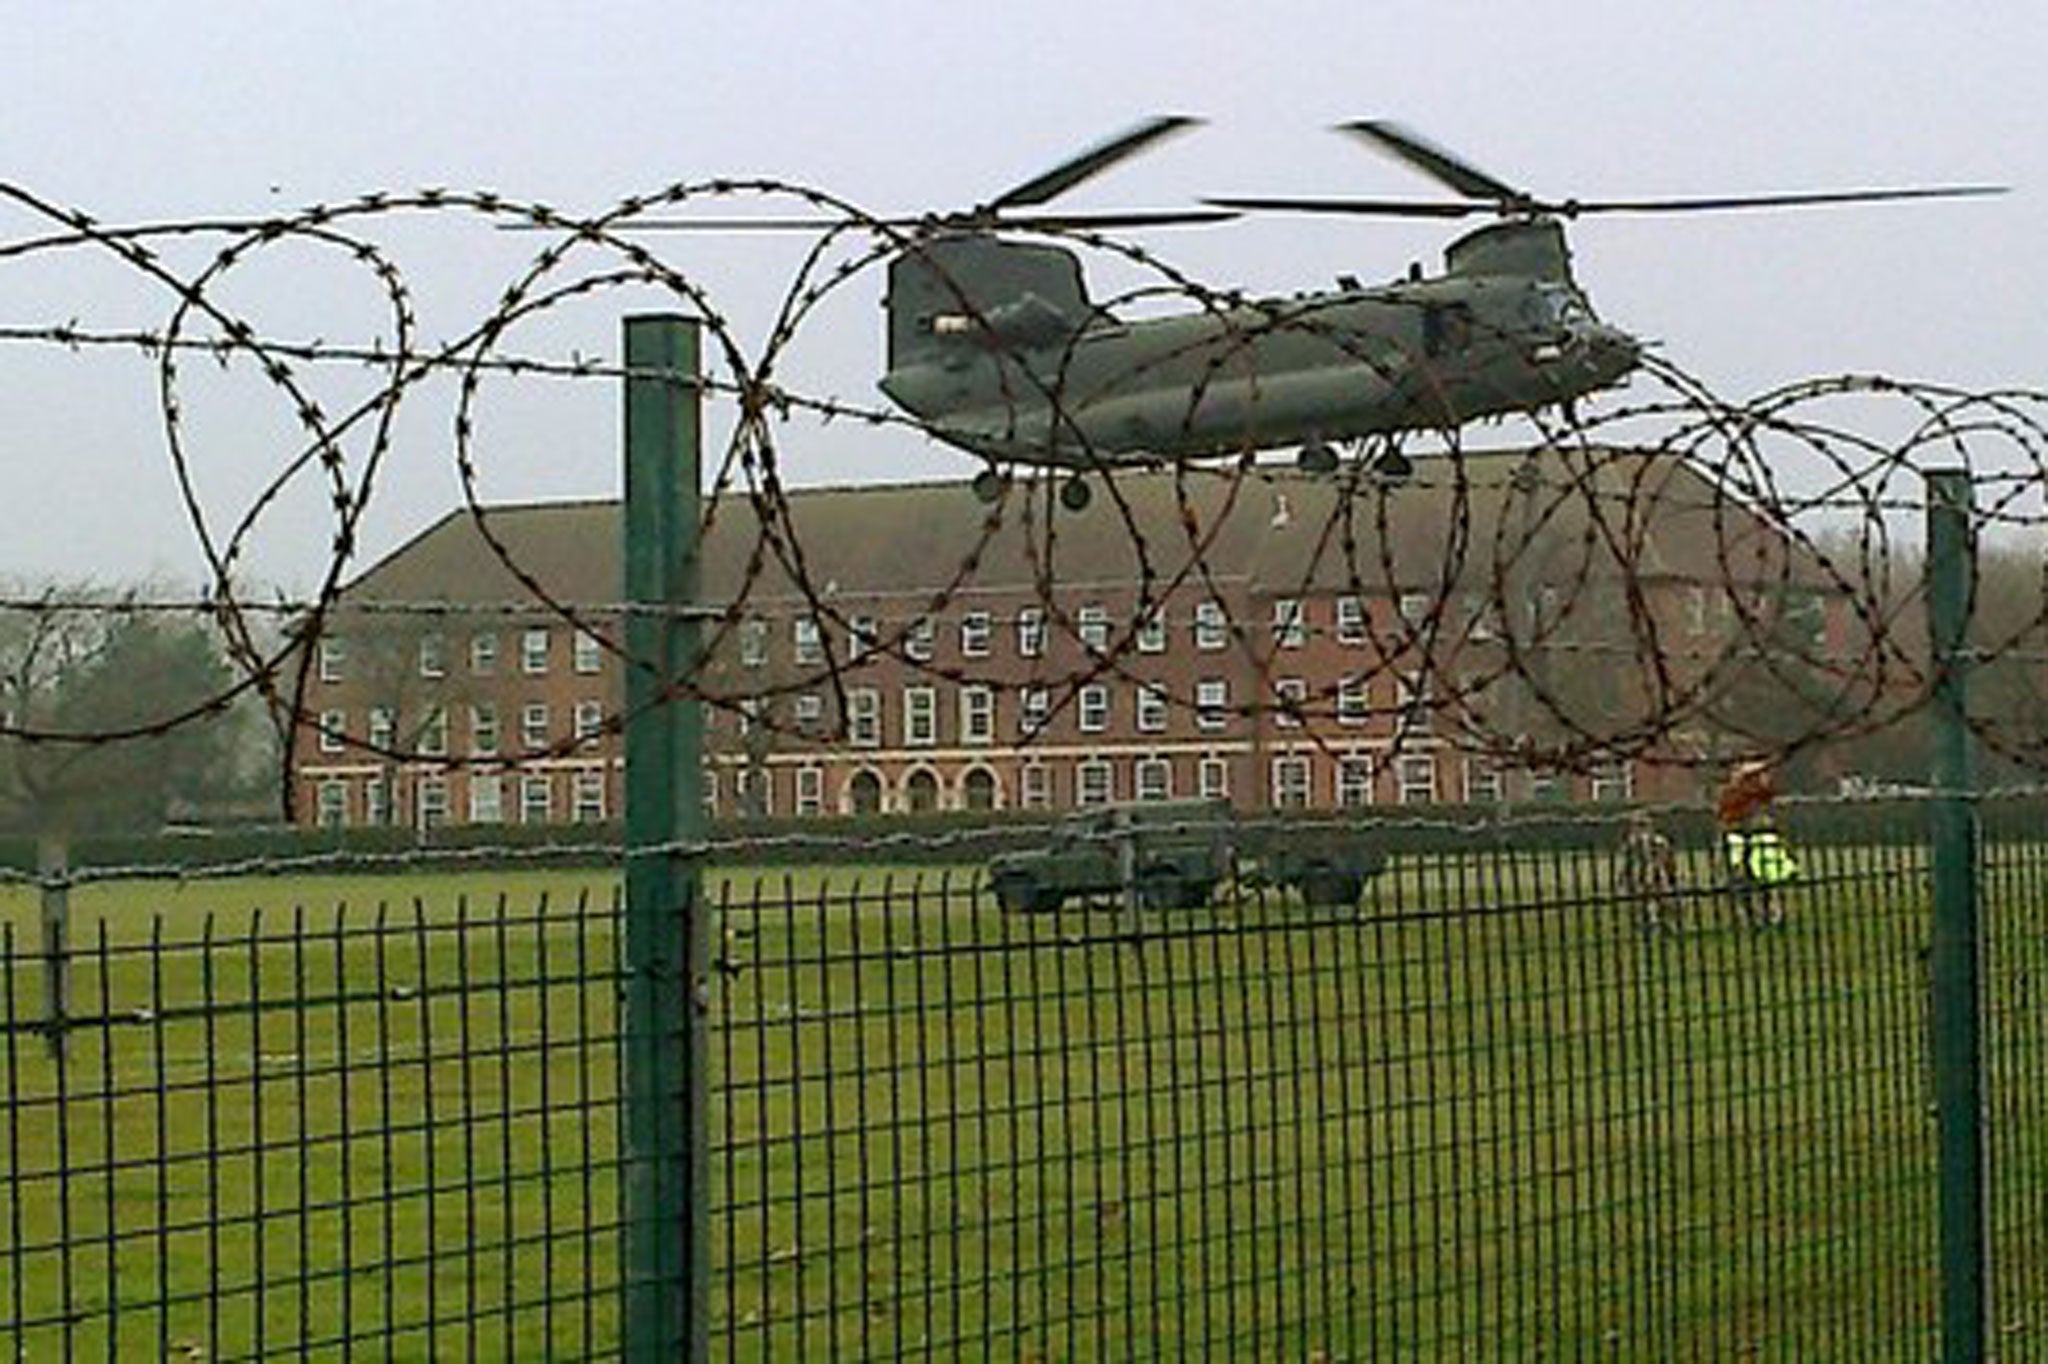 A soldier has been found dead at Clive Barracks in Tern Hill, Shropshire